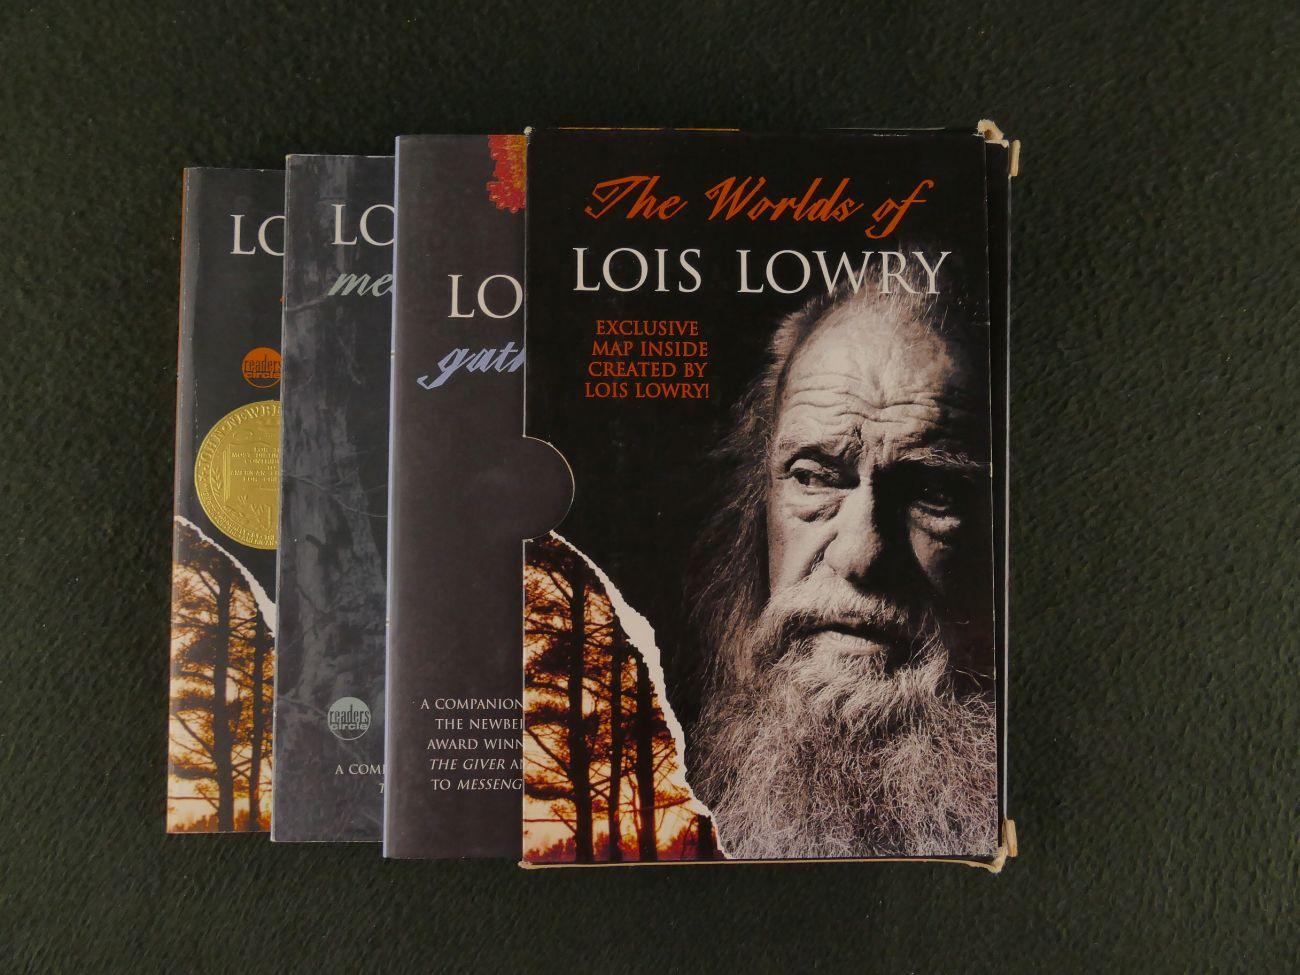 Lowry, Lois - The worlds of Lois Lowry  ( 6 foto's)